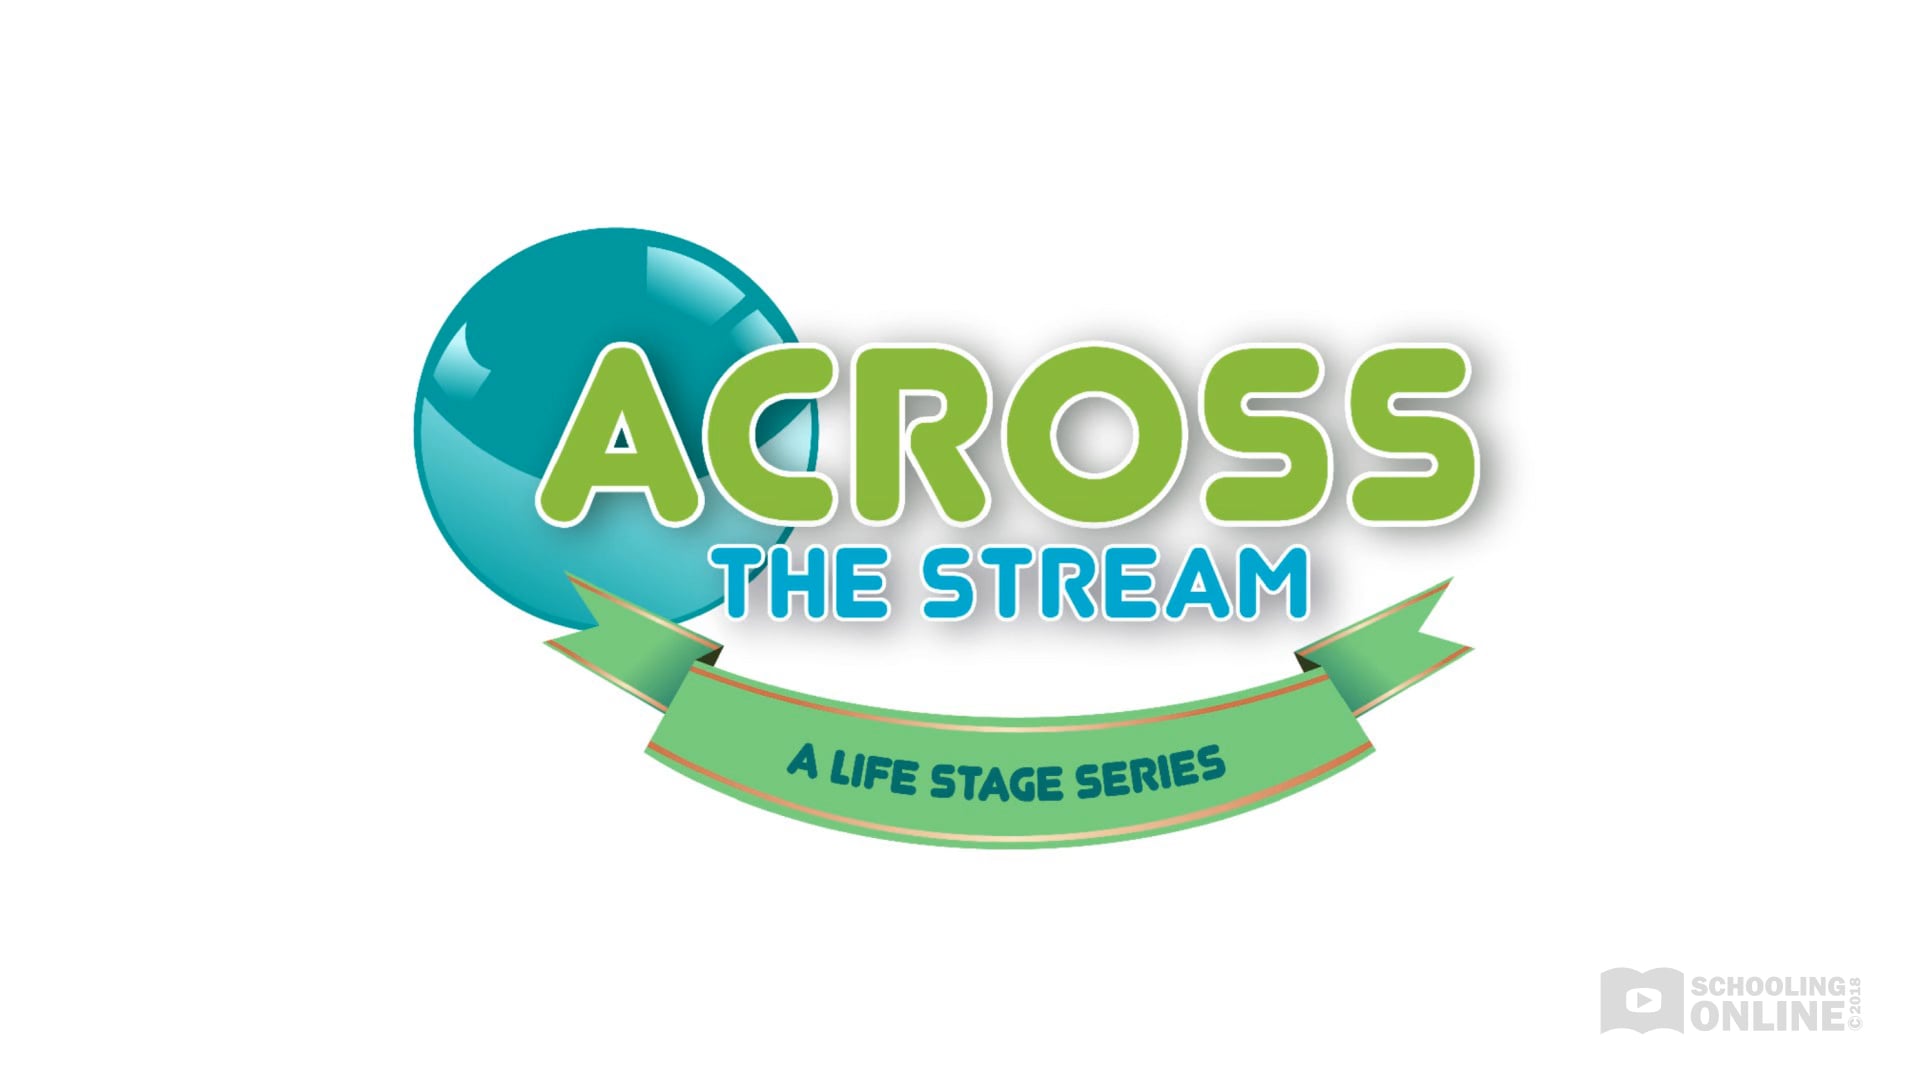 Across The Stream - The Life Stage Series